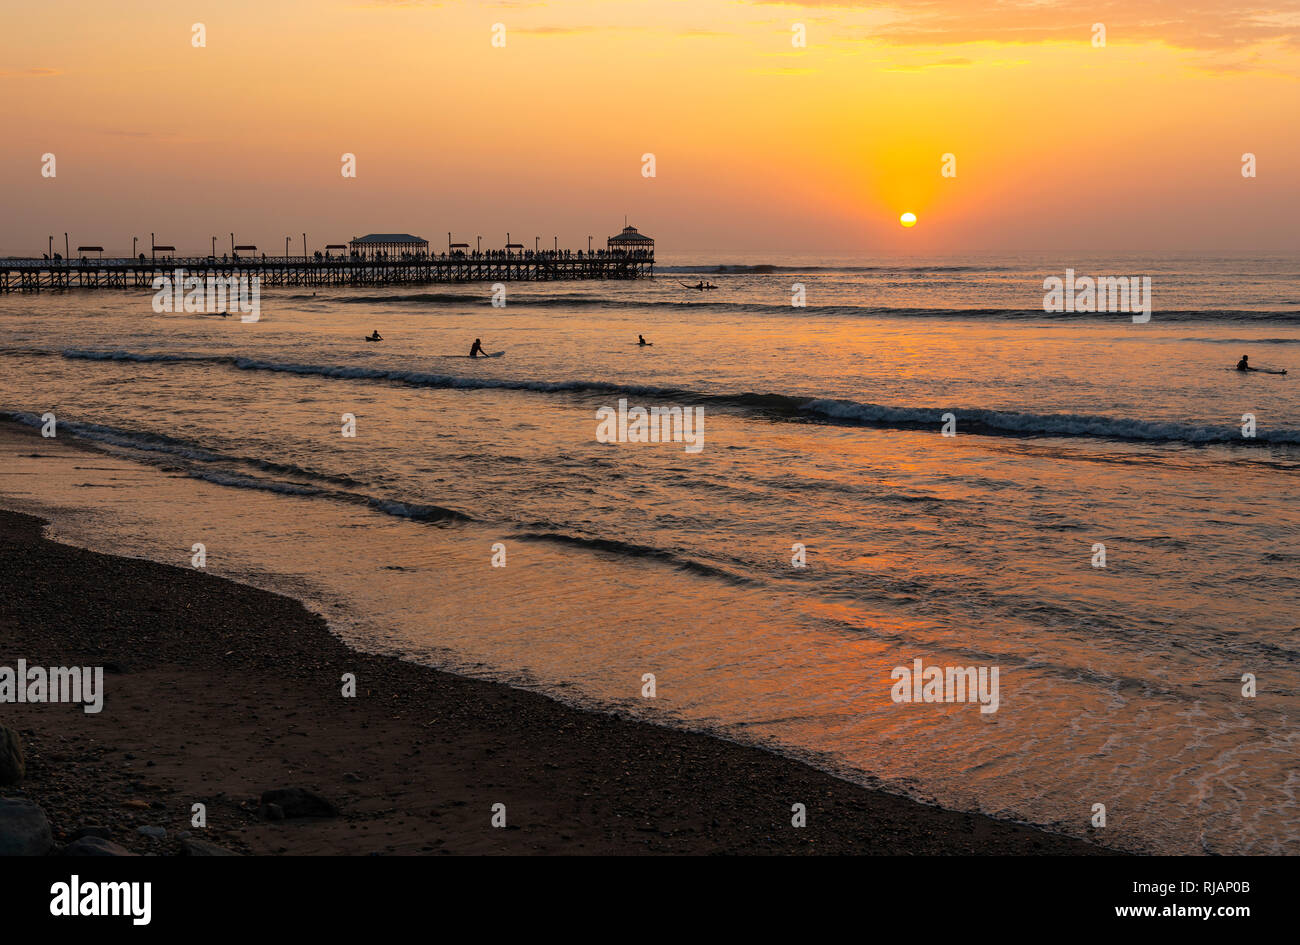 The wooden pier of Huanchaco beach near Trujillo with the silhouette of surfers at sunset, Peru. Stock Photo